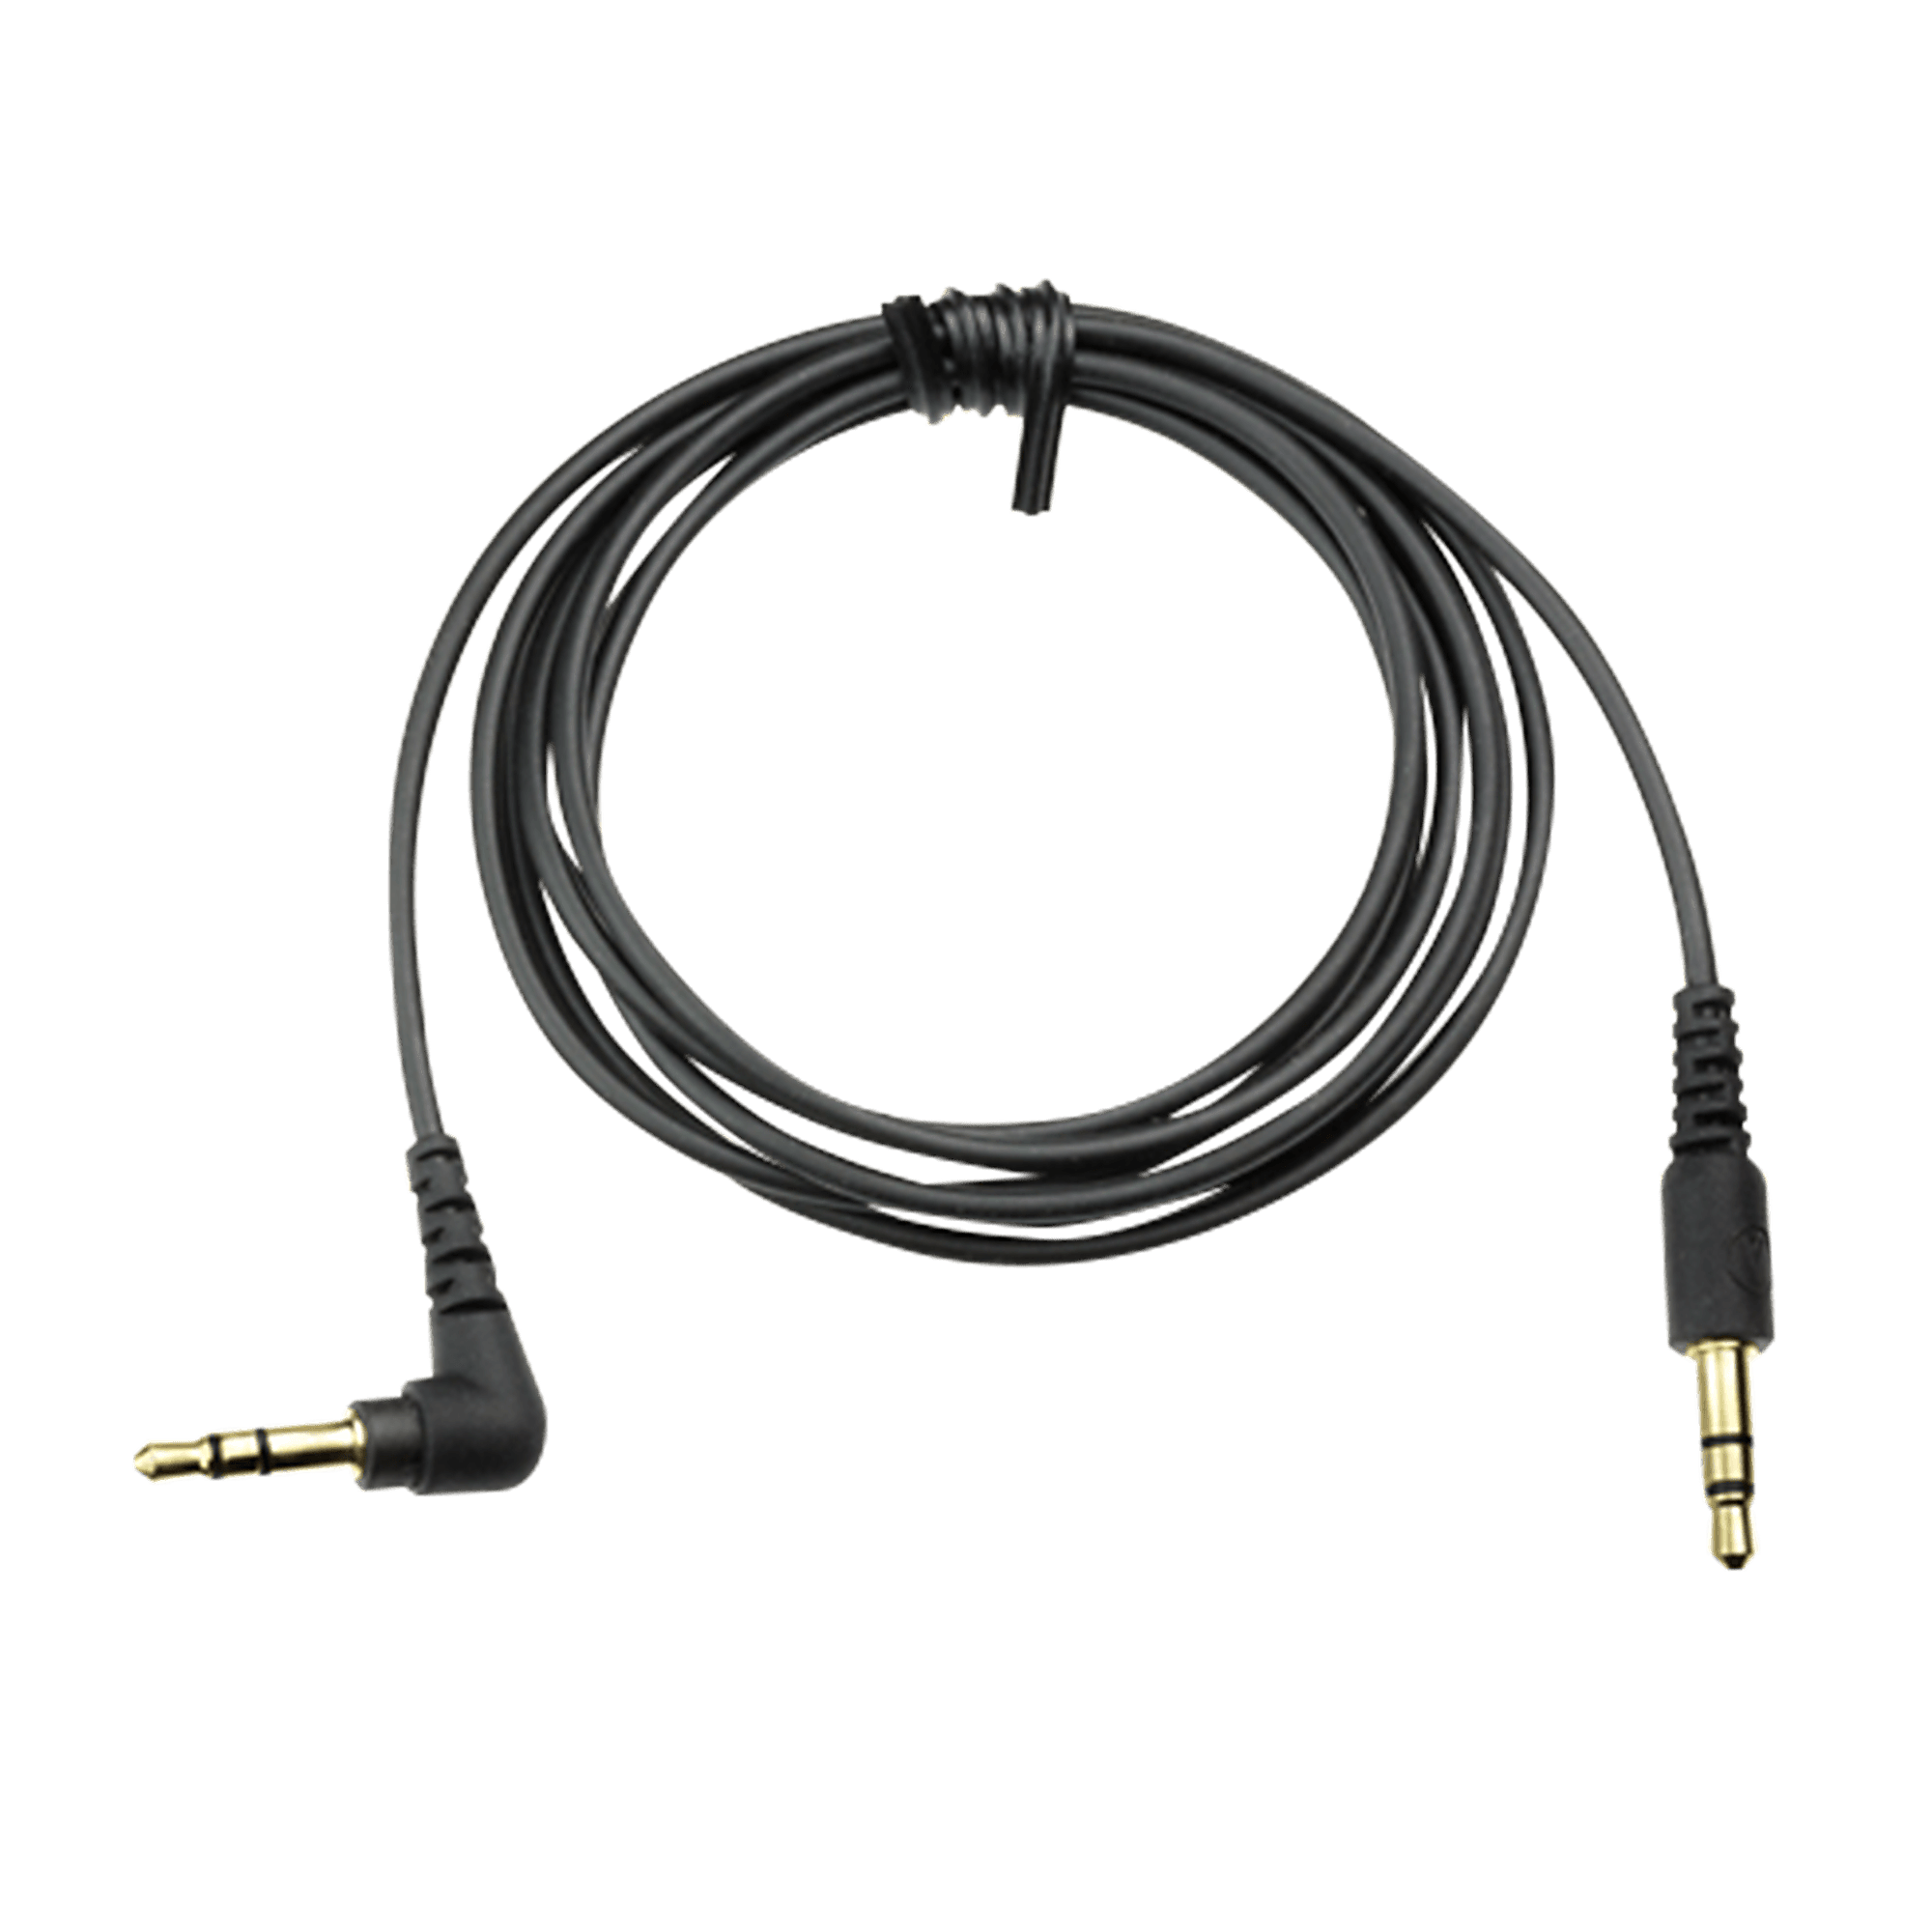 ATH-ANC9 Audio Cable